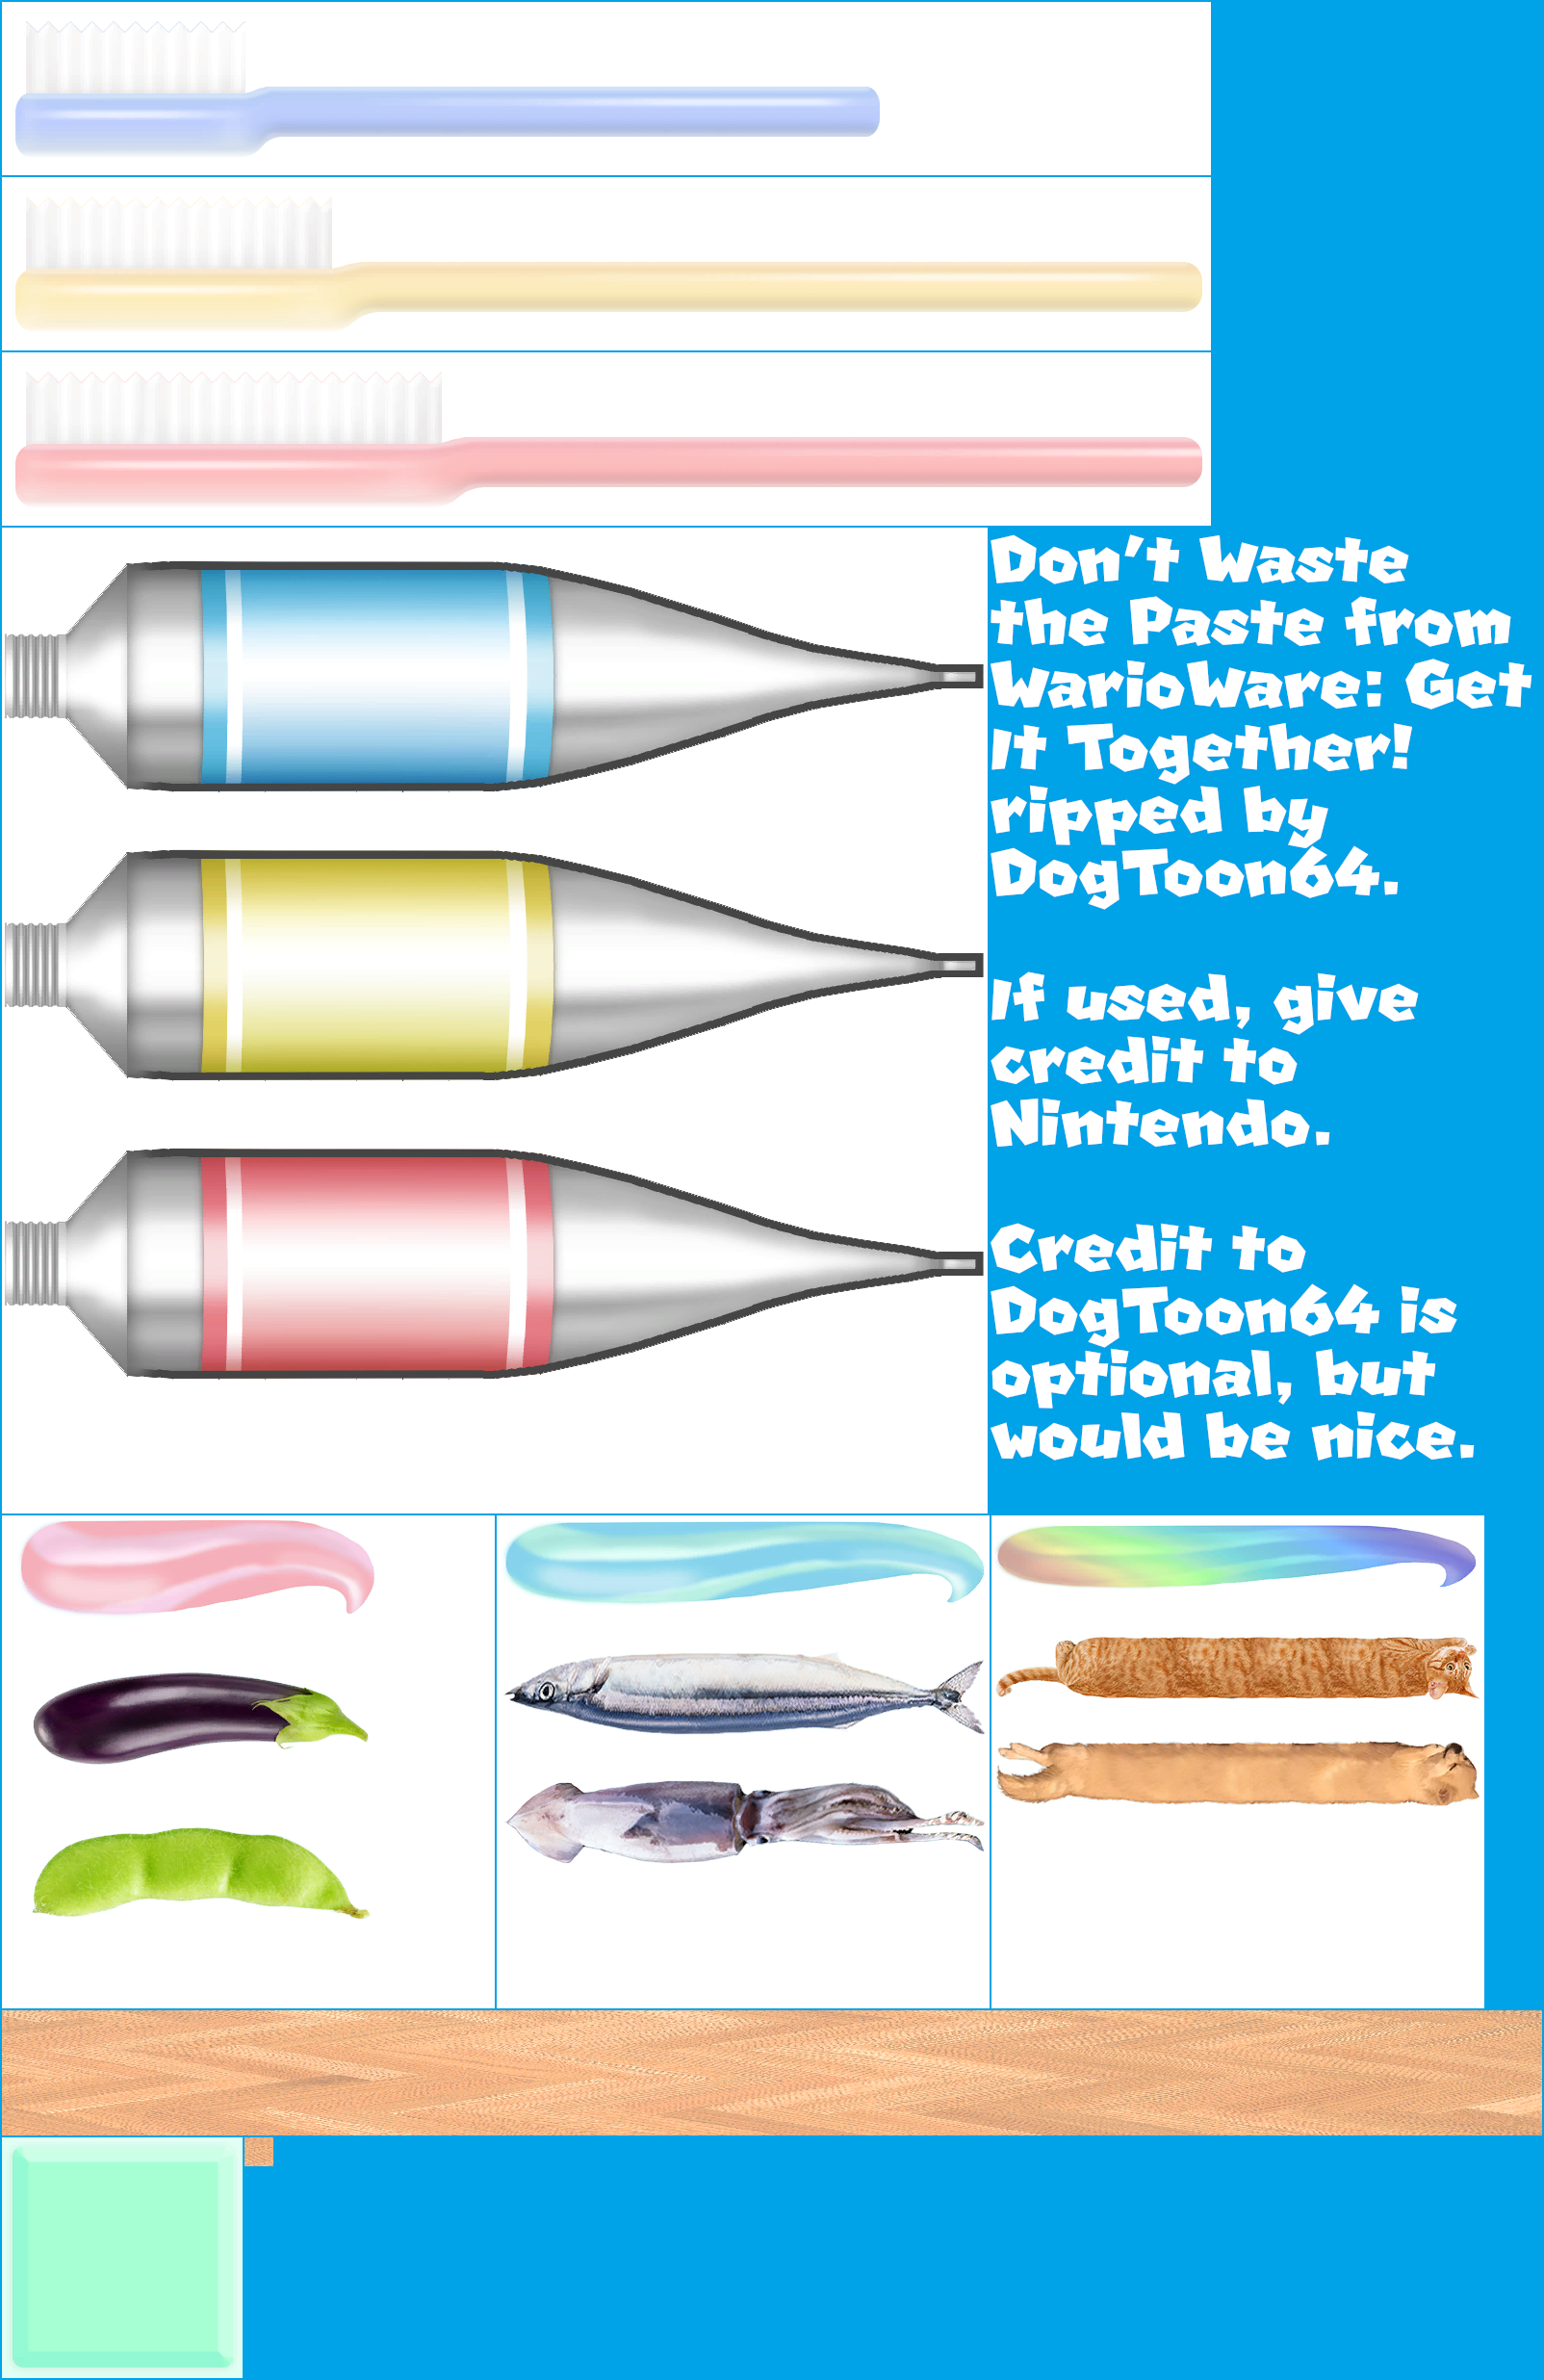 WarioWare: Get It Together! - Don't Waste the Paste